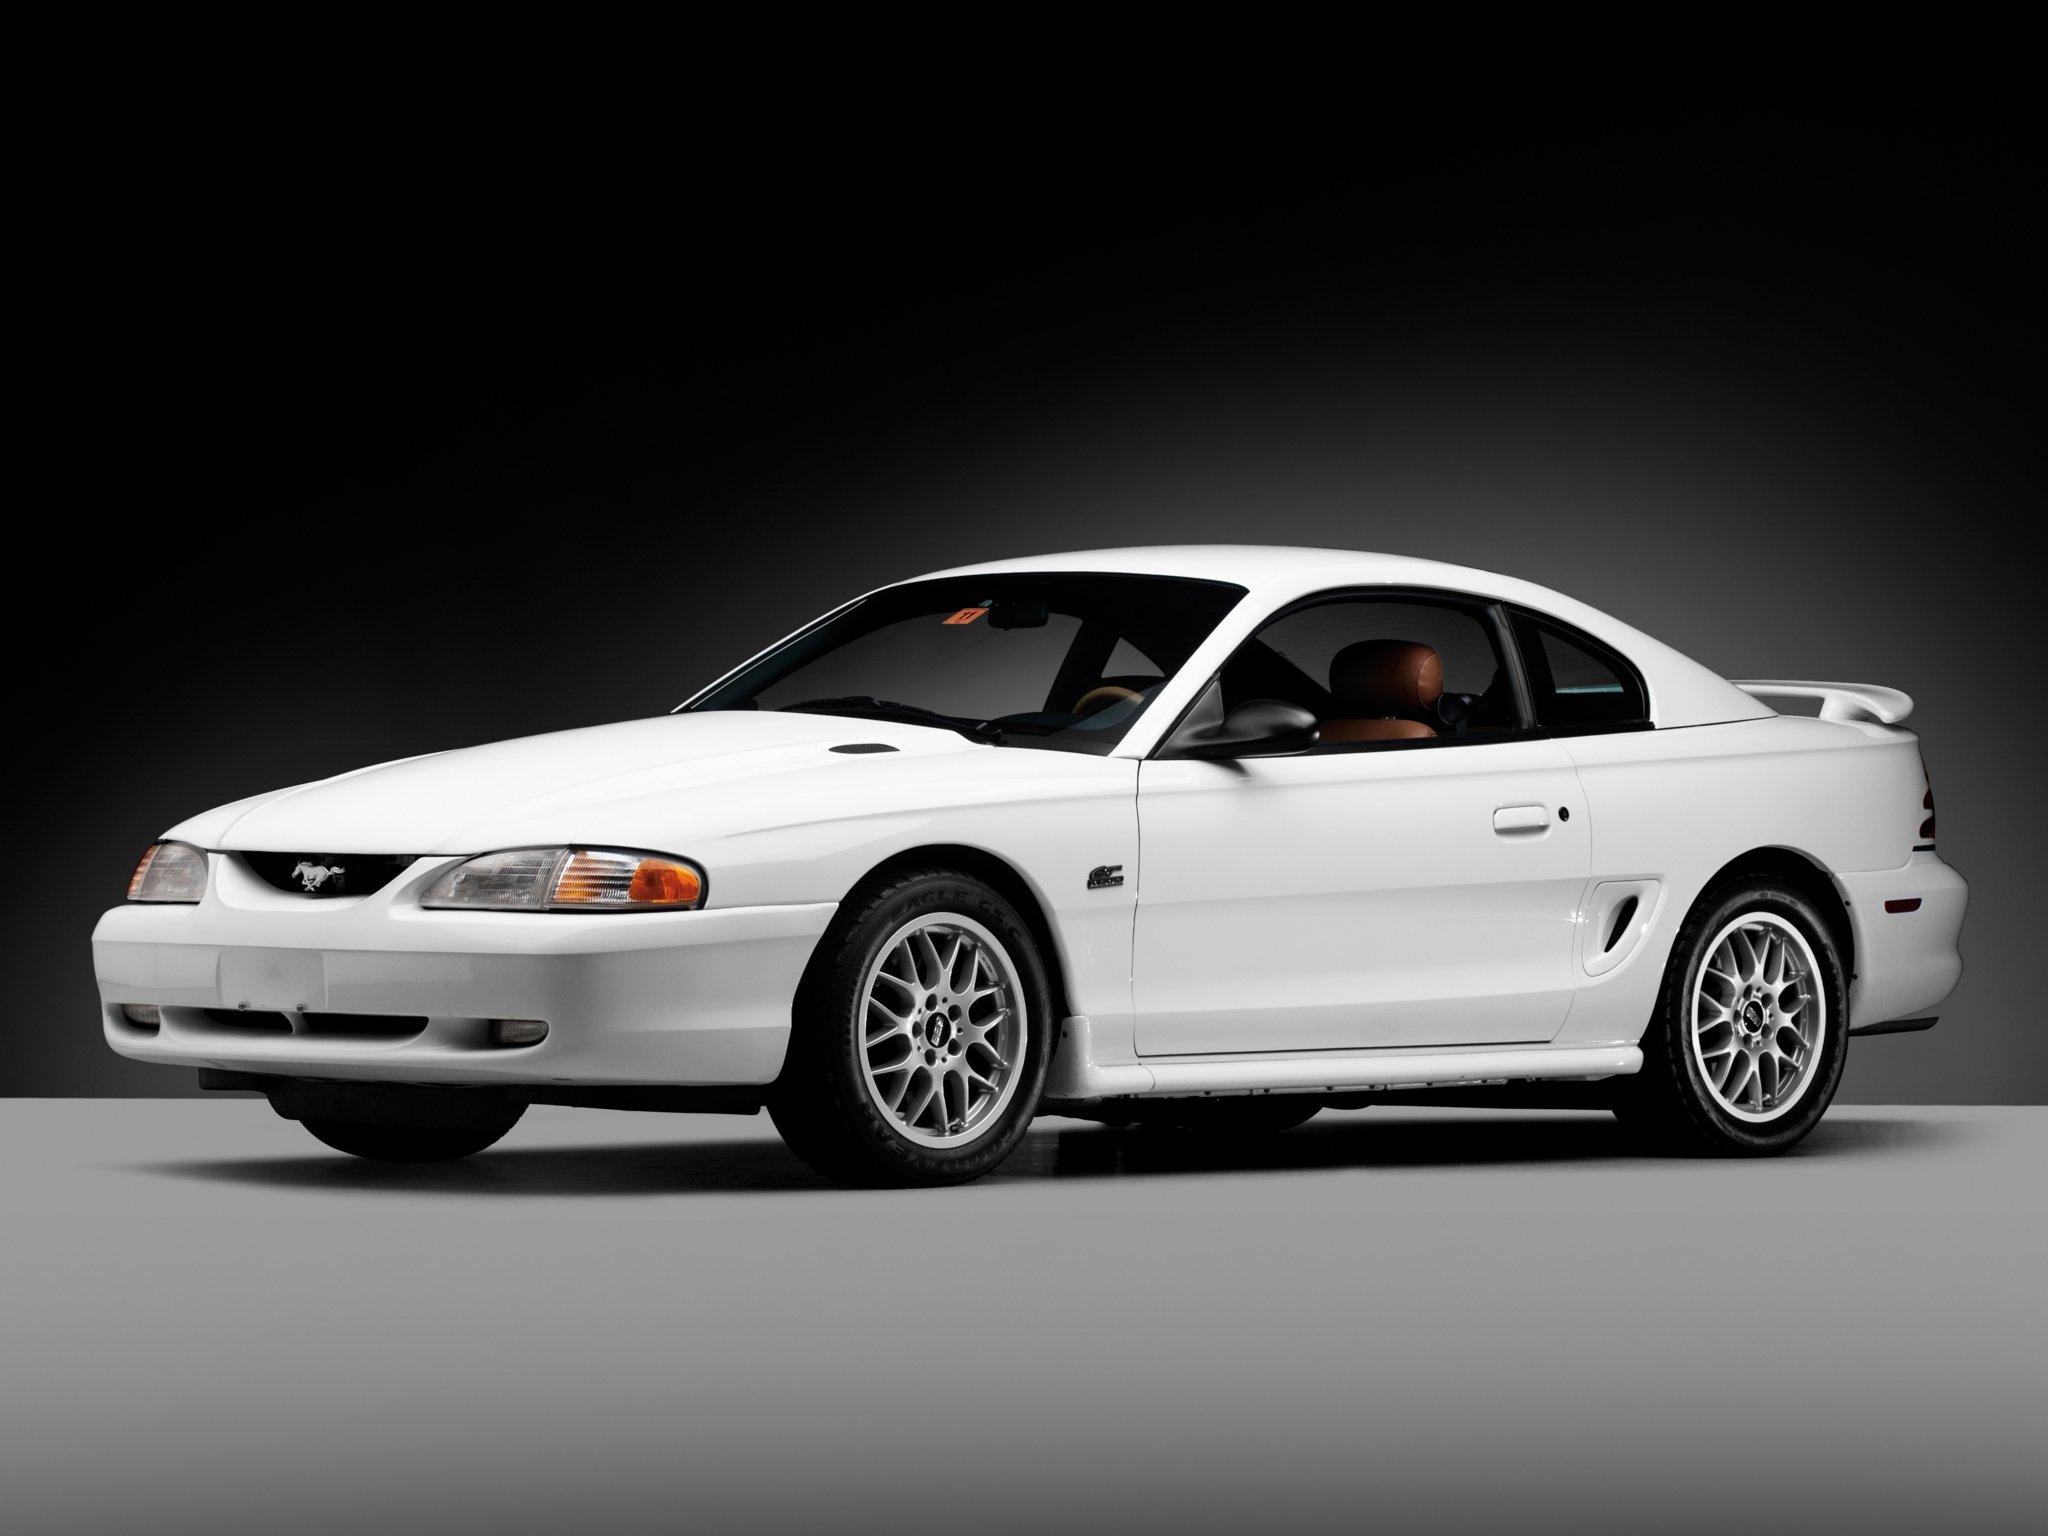 ford, Mustang, Gt, Coupe, Cars, 1993 Wallpaper